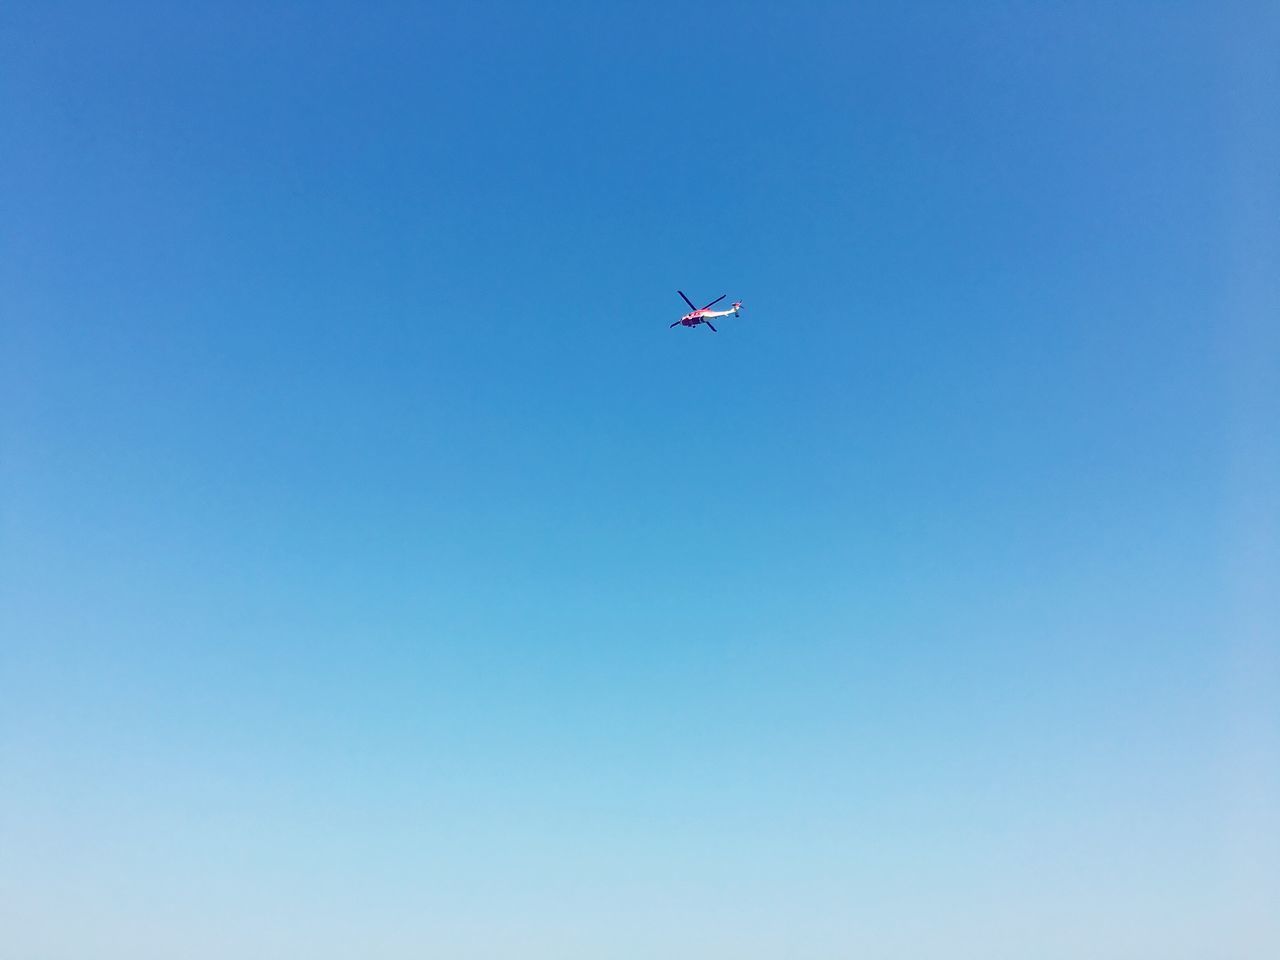 LOW ANGLE VIEW OF AIRPLANE FLYING IN SKY